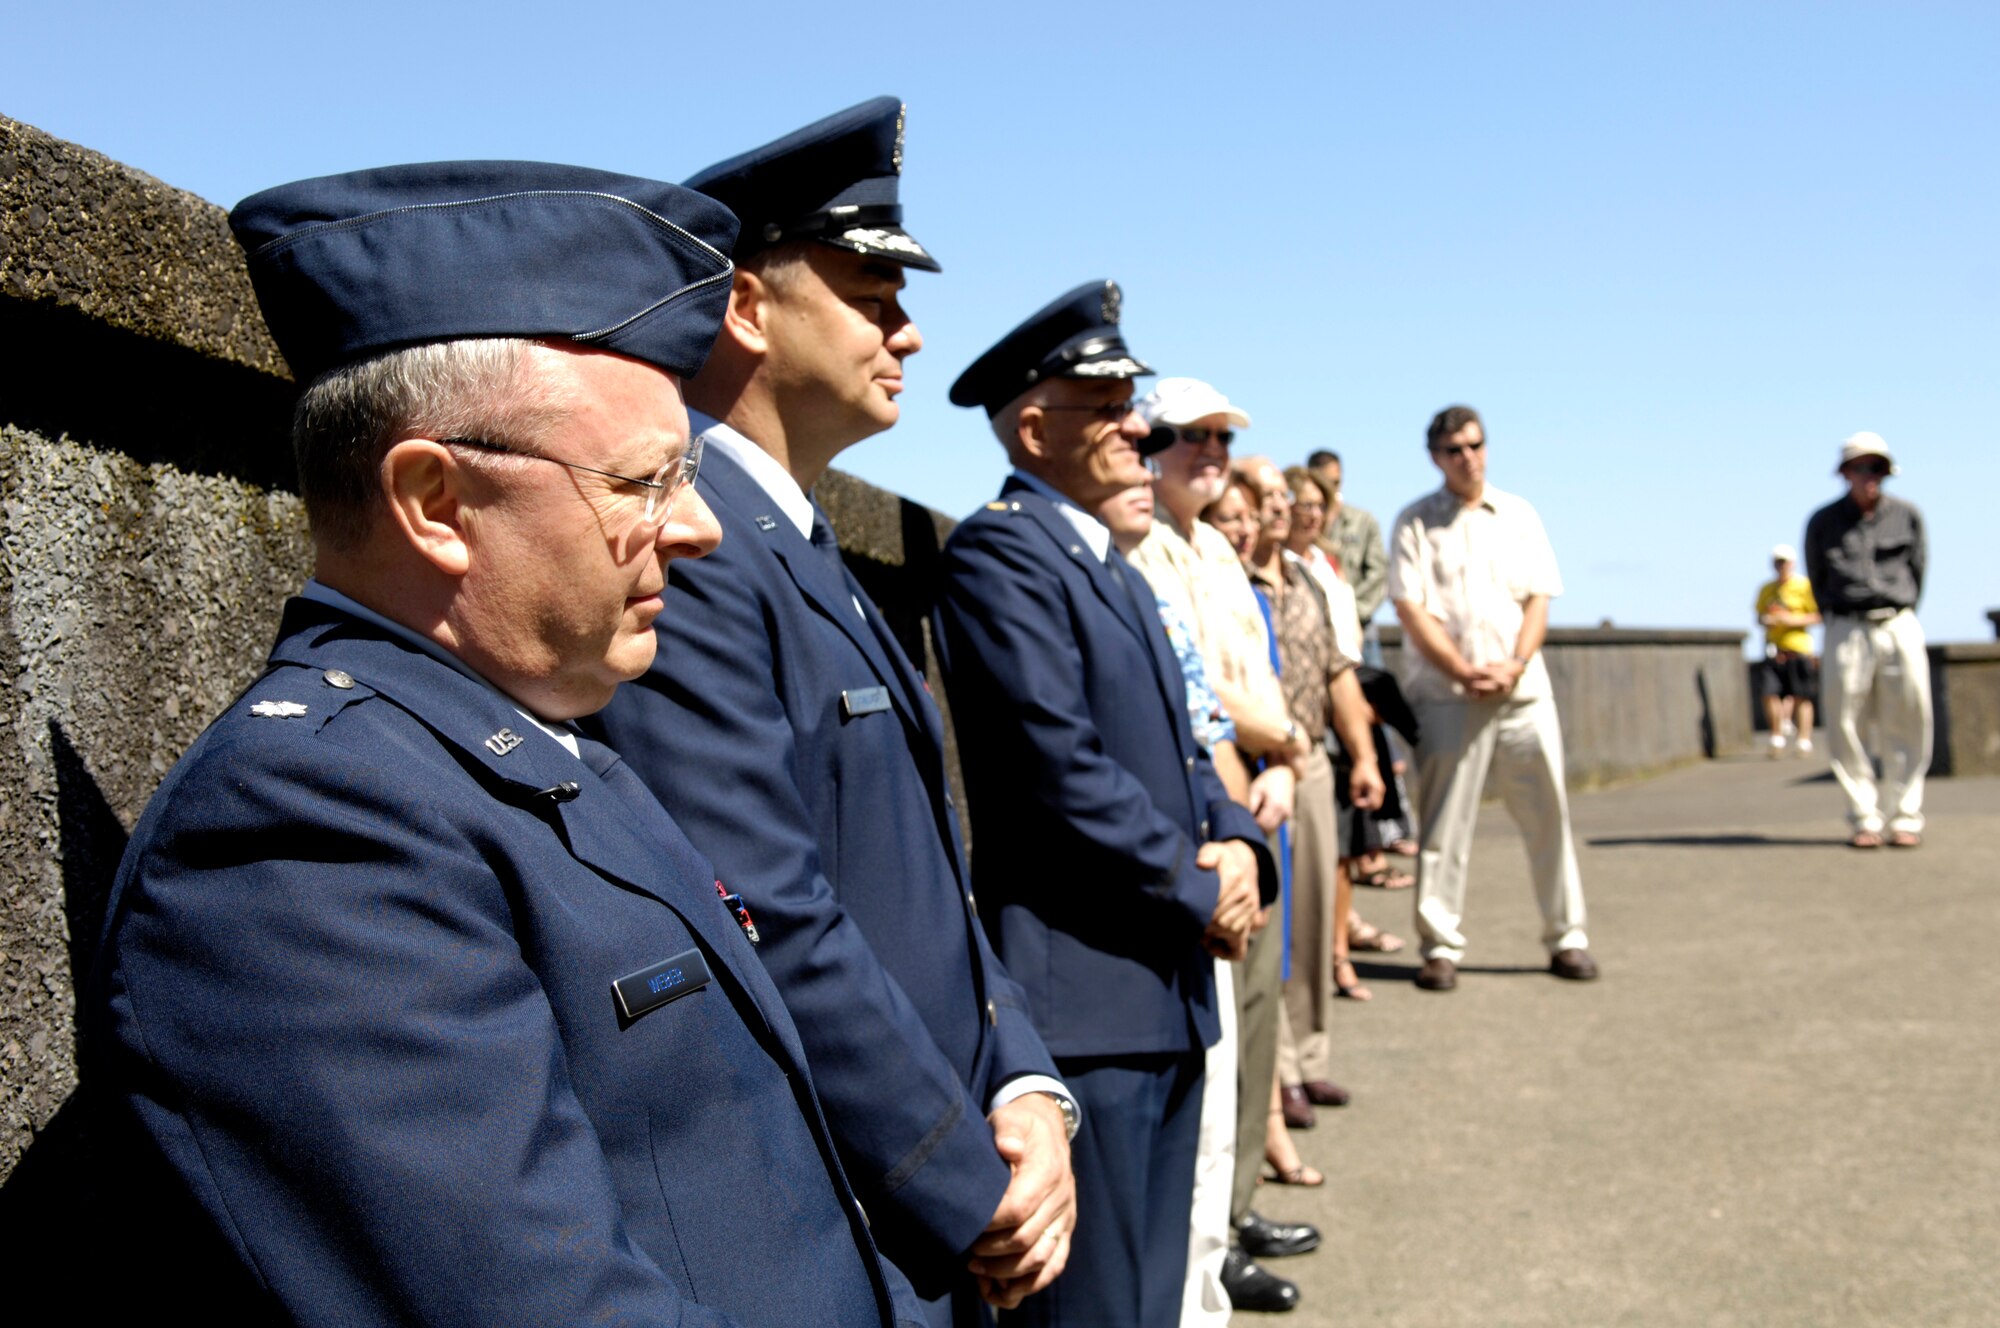 Hickam Air Force Base Airmen and Hawaii Aviation Preservation Society members listen to a speech during a memorial ceremony at Nu'uanu Pali Lookout, Hawaii April 5, 2007. Airmen and HAPS members held a memorial and dedicated a plaque for 10 crew members of a B-17E Flying Fortress that crashed into the cliffs of Mt. Keahiakahoe 65 years ago. (U.S. Air Force photo/ Tech. Sgt. Shane A. Cuomo)